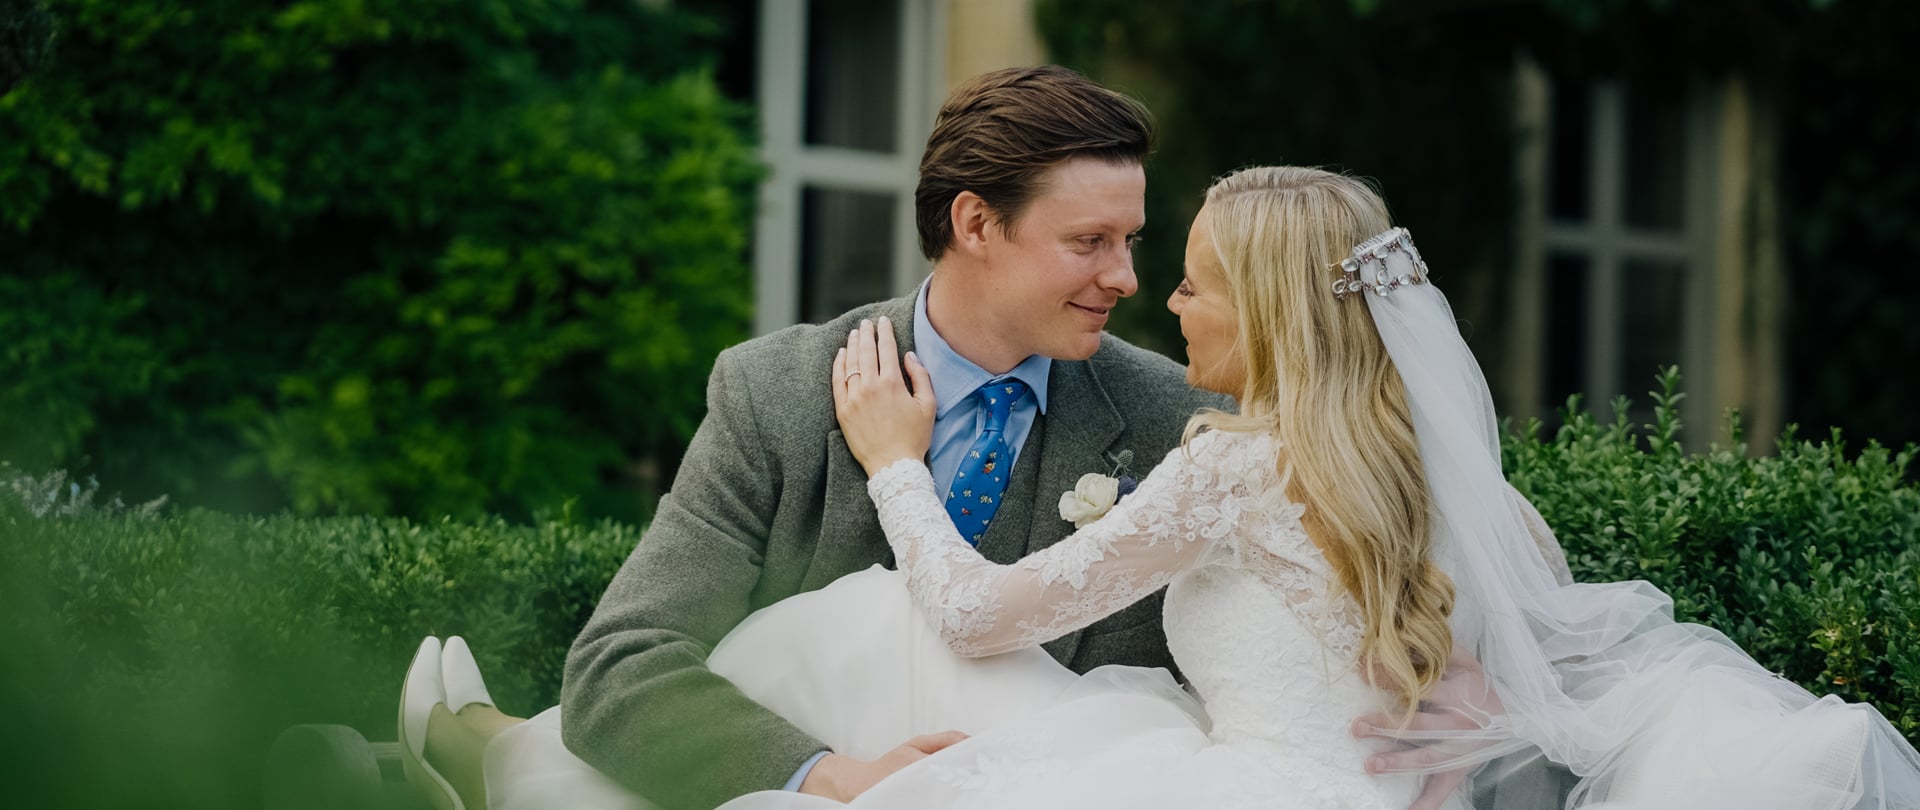 Brittany & Angus Wedding Video Filmed atOxfordshire,England